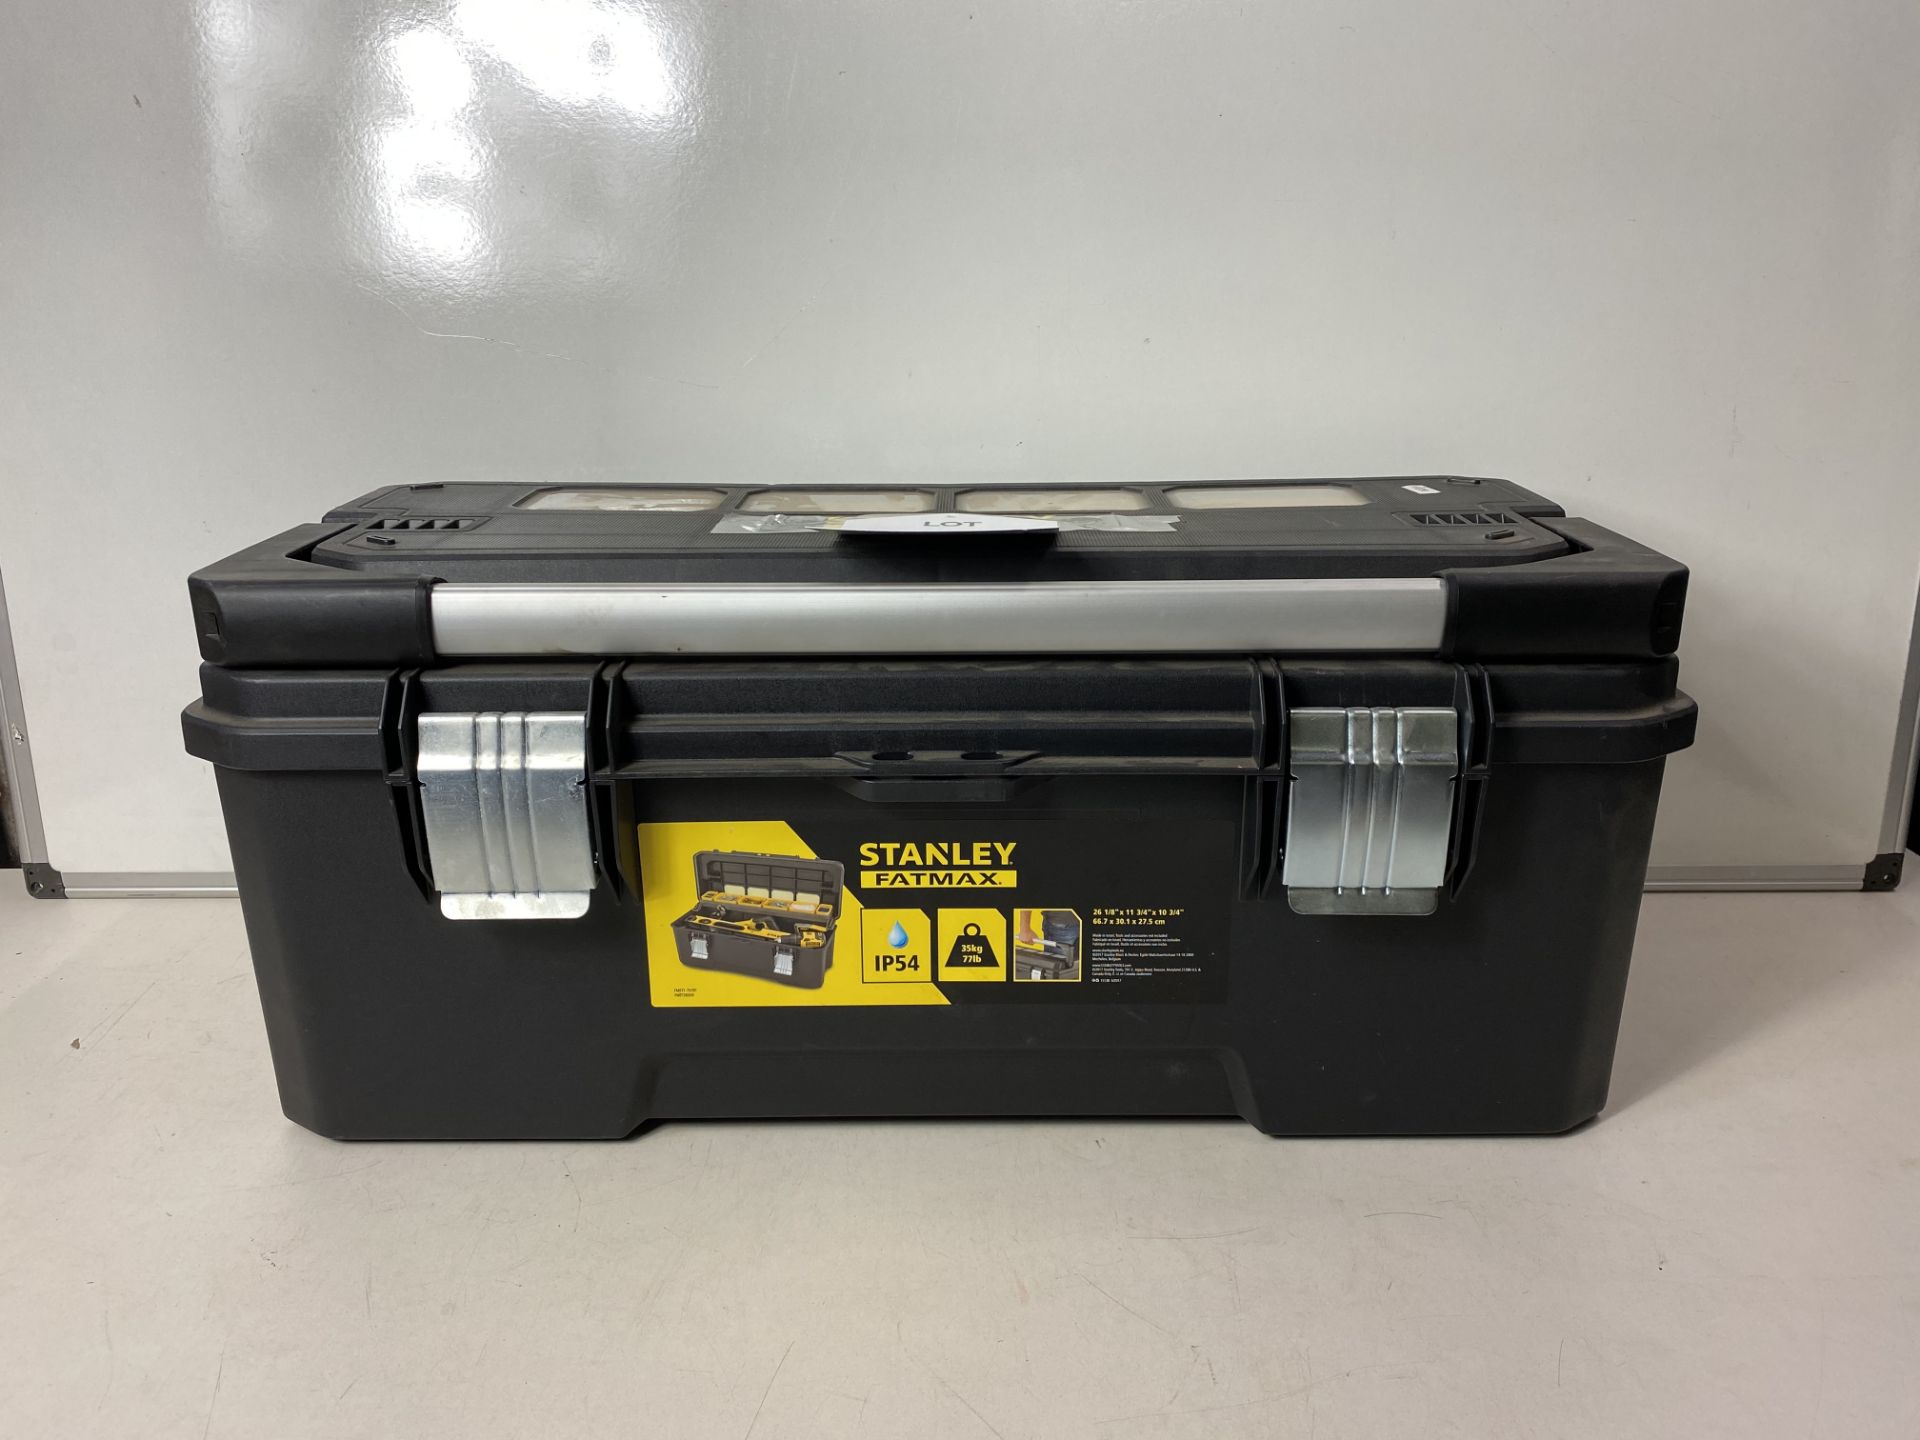 StanleyFMST1-75791 26" FATMAX CANTILEVER PRO TOOLBOX